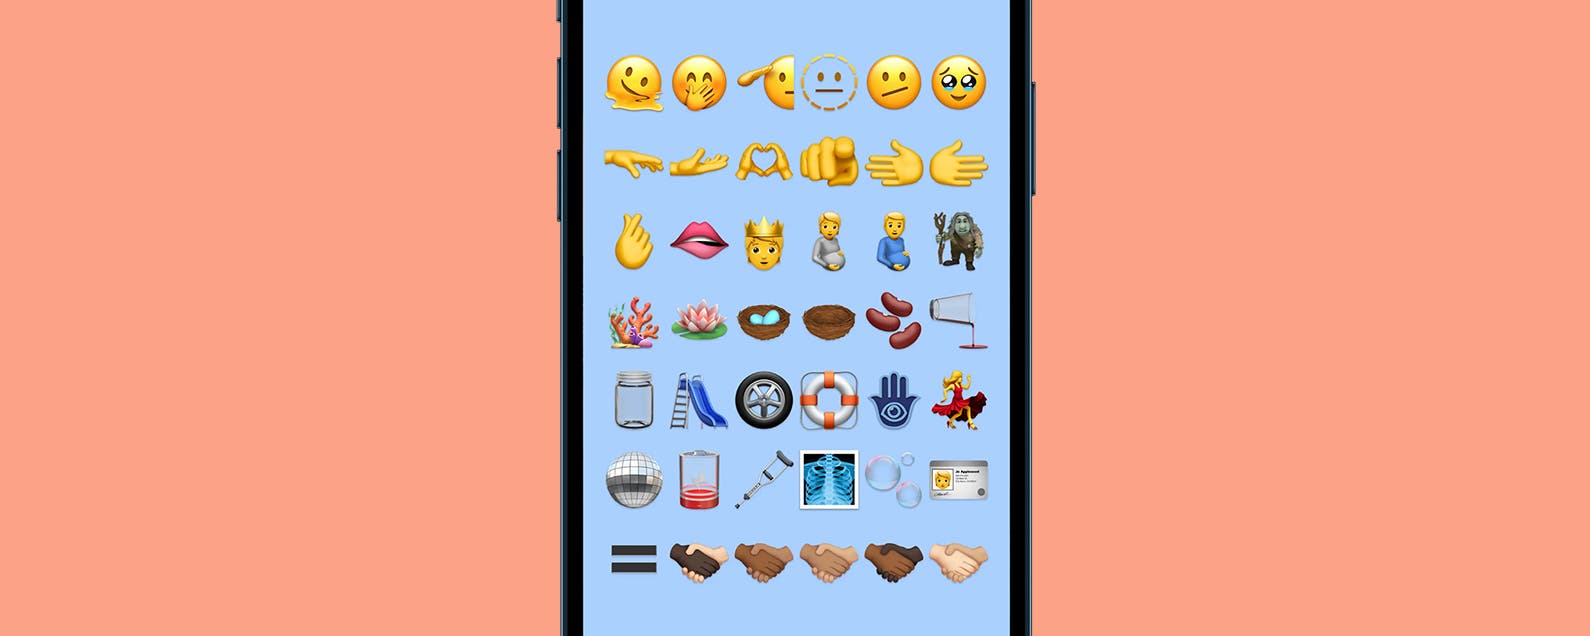 All the New Emojis 2022